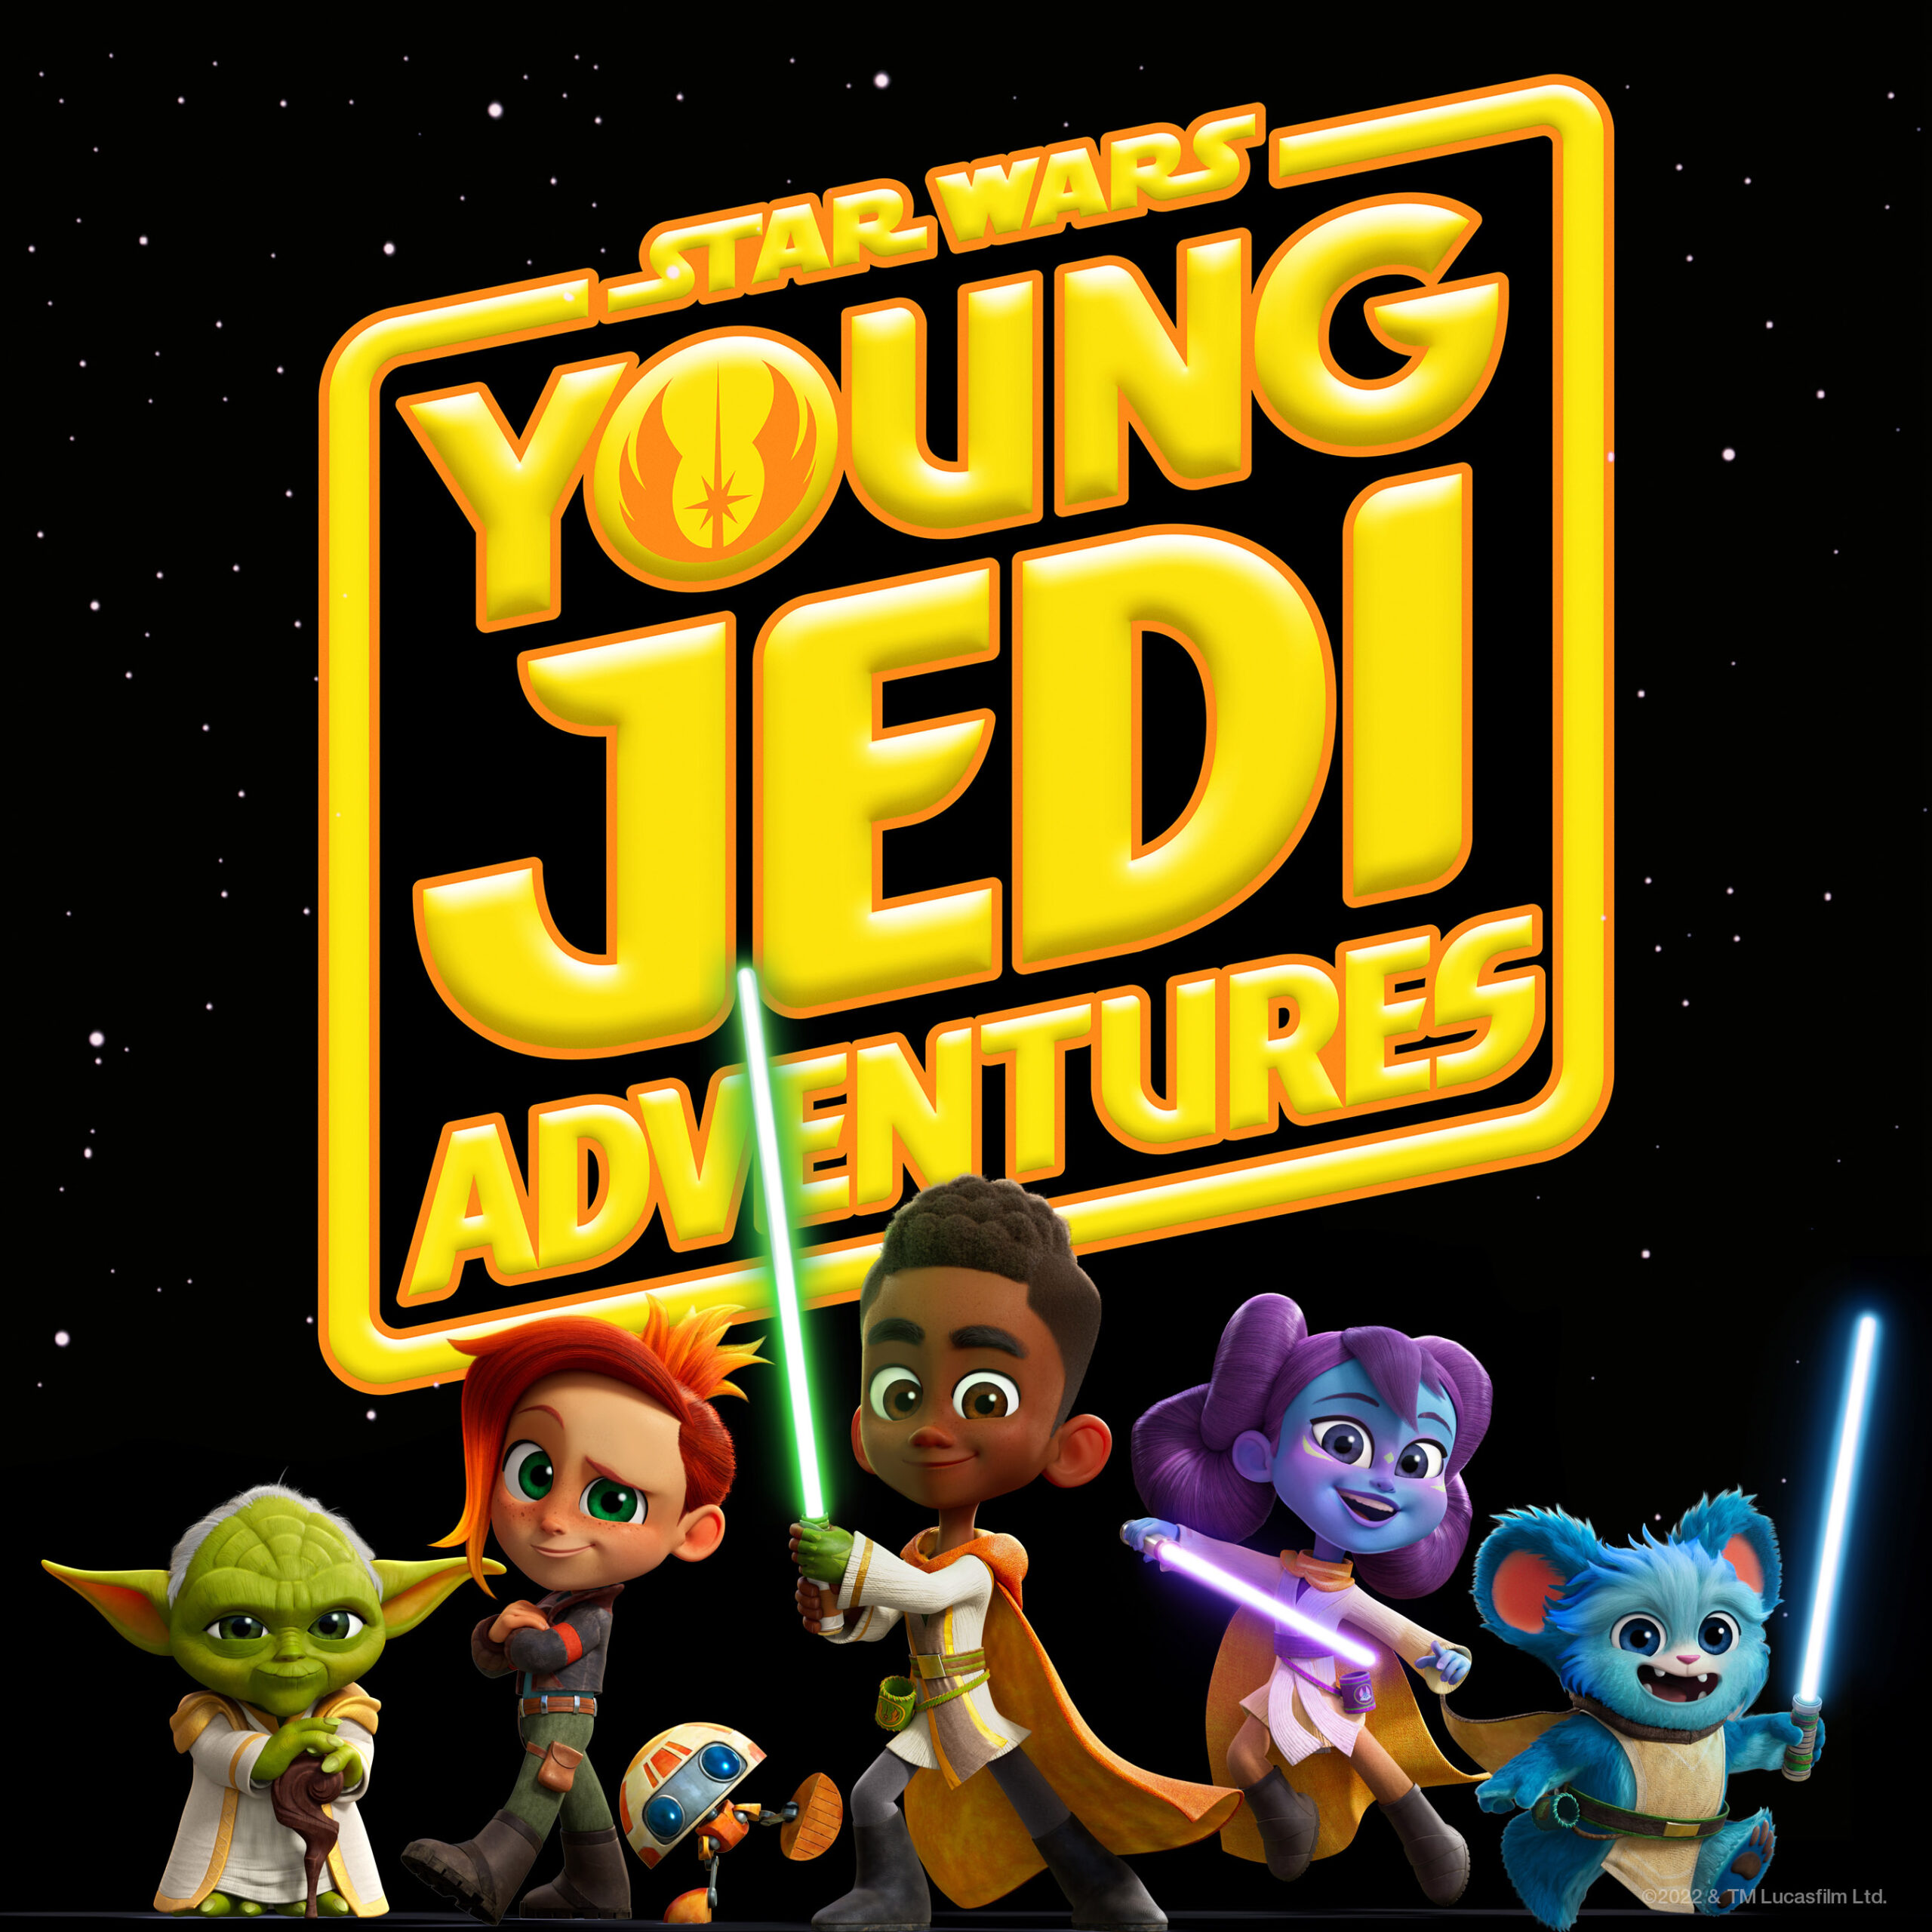 "Star Wars: Young Jedi Adventures" Episodes Coming to Disney+ and Disney Junior August 2